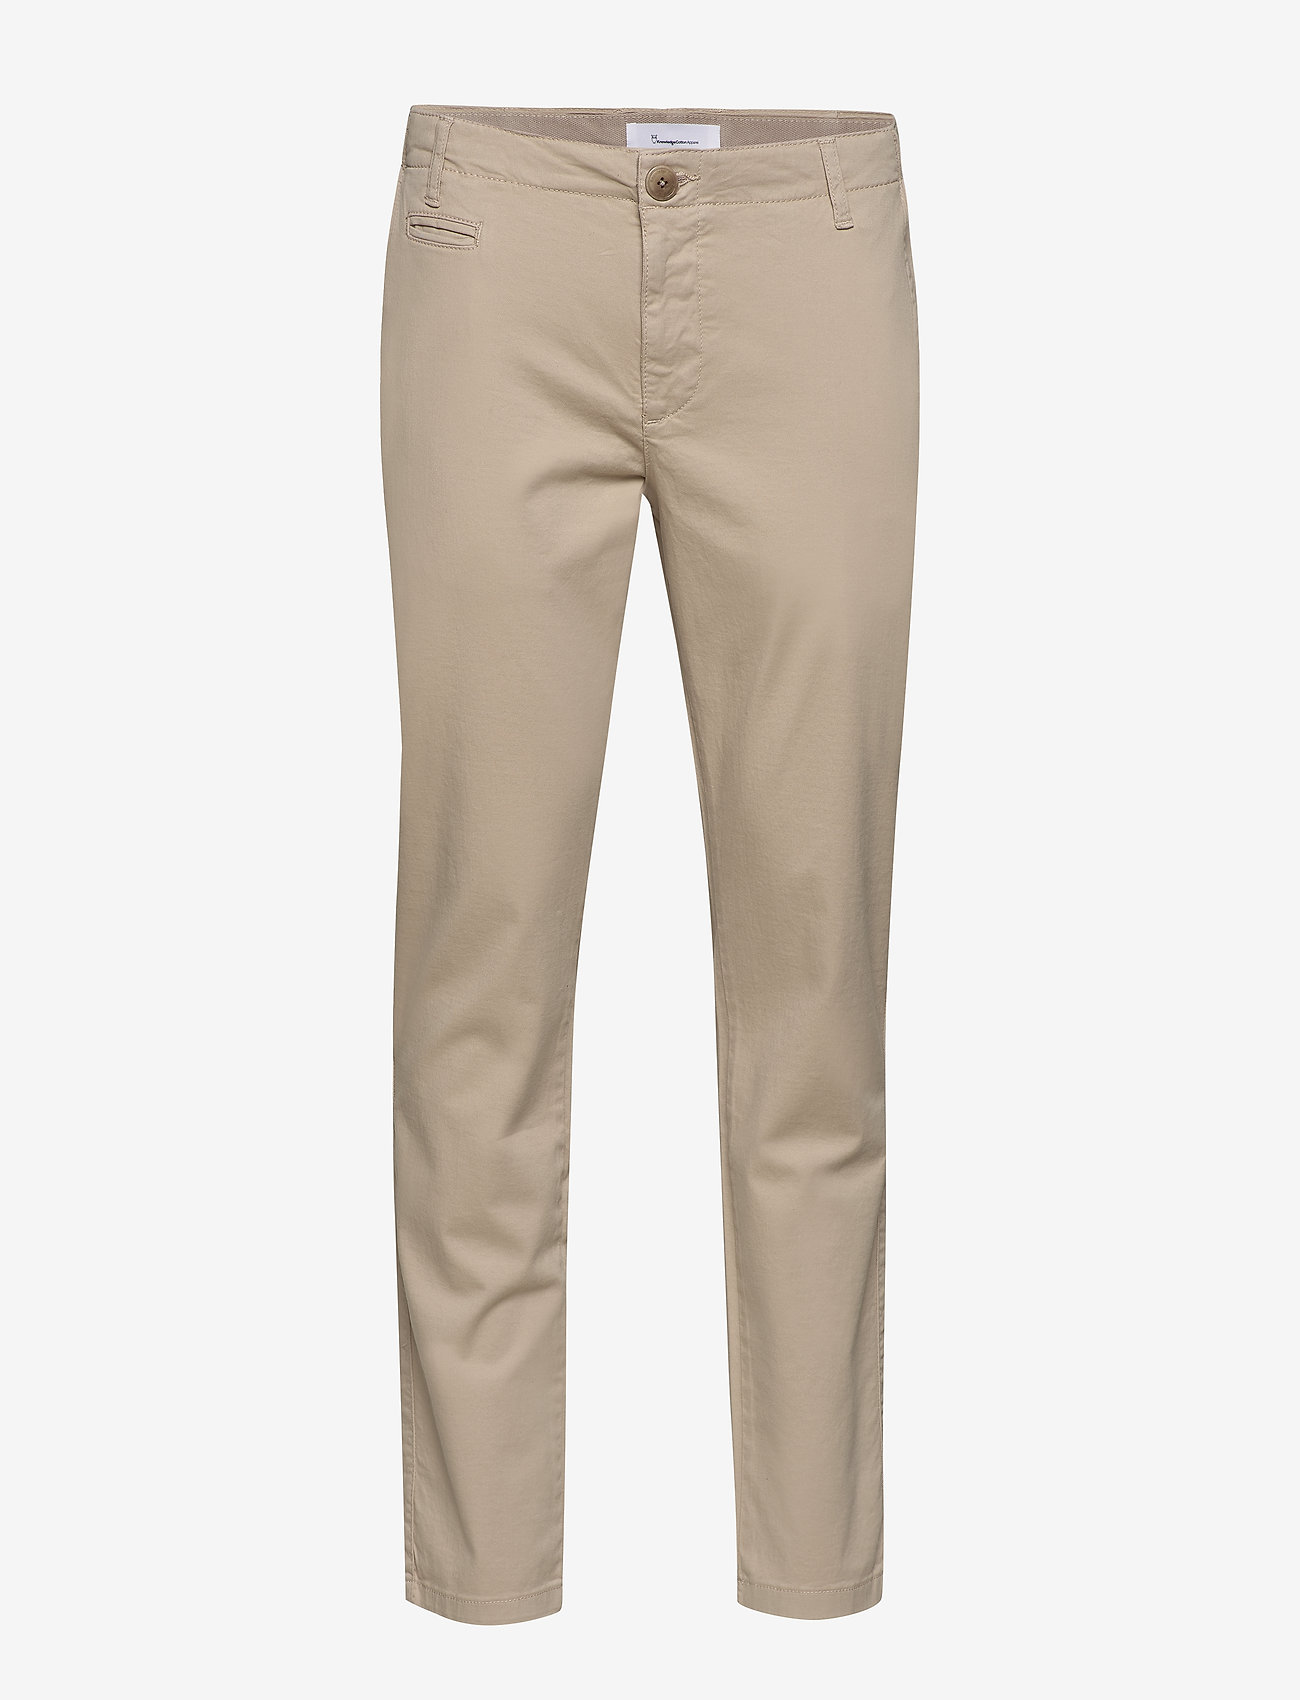 Knowledge Cotton Apparel - CHUCK regular stretched chino pant - chinos - light feather gray - 0